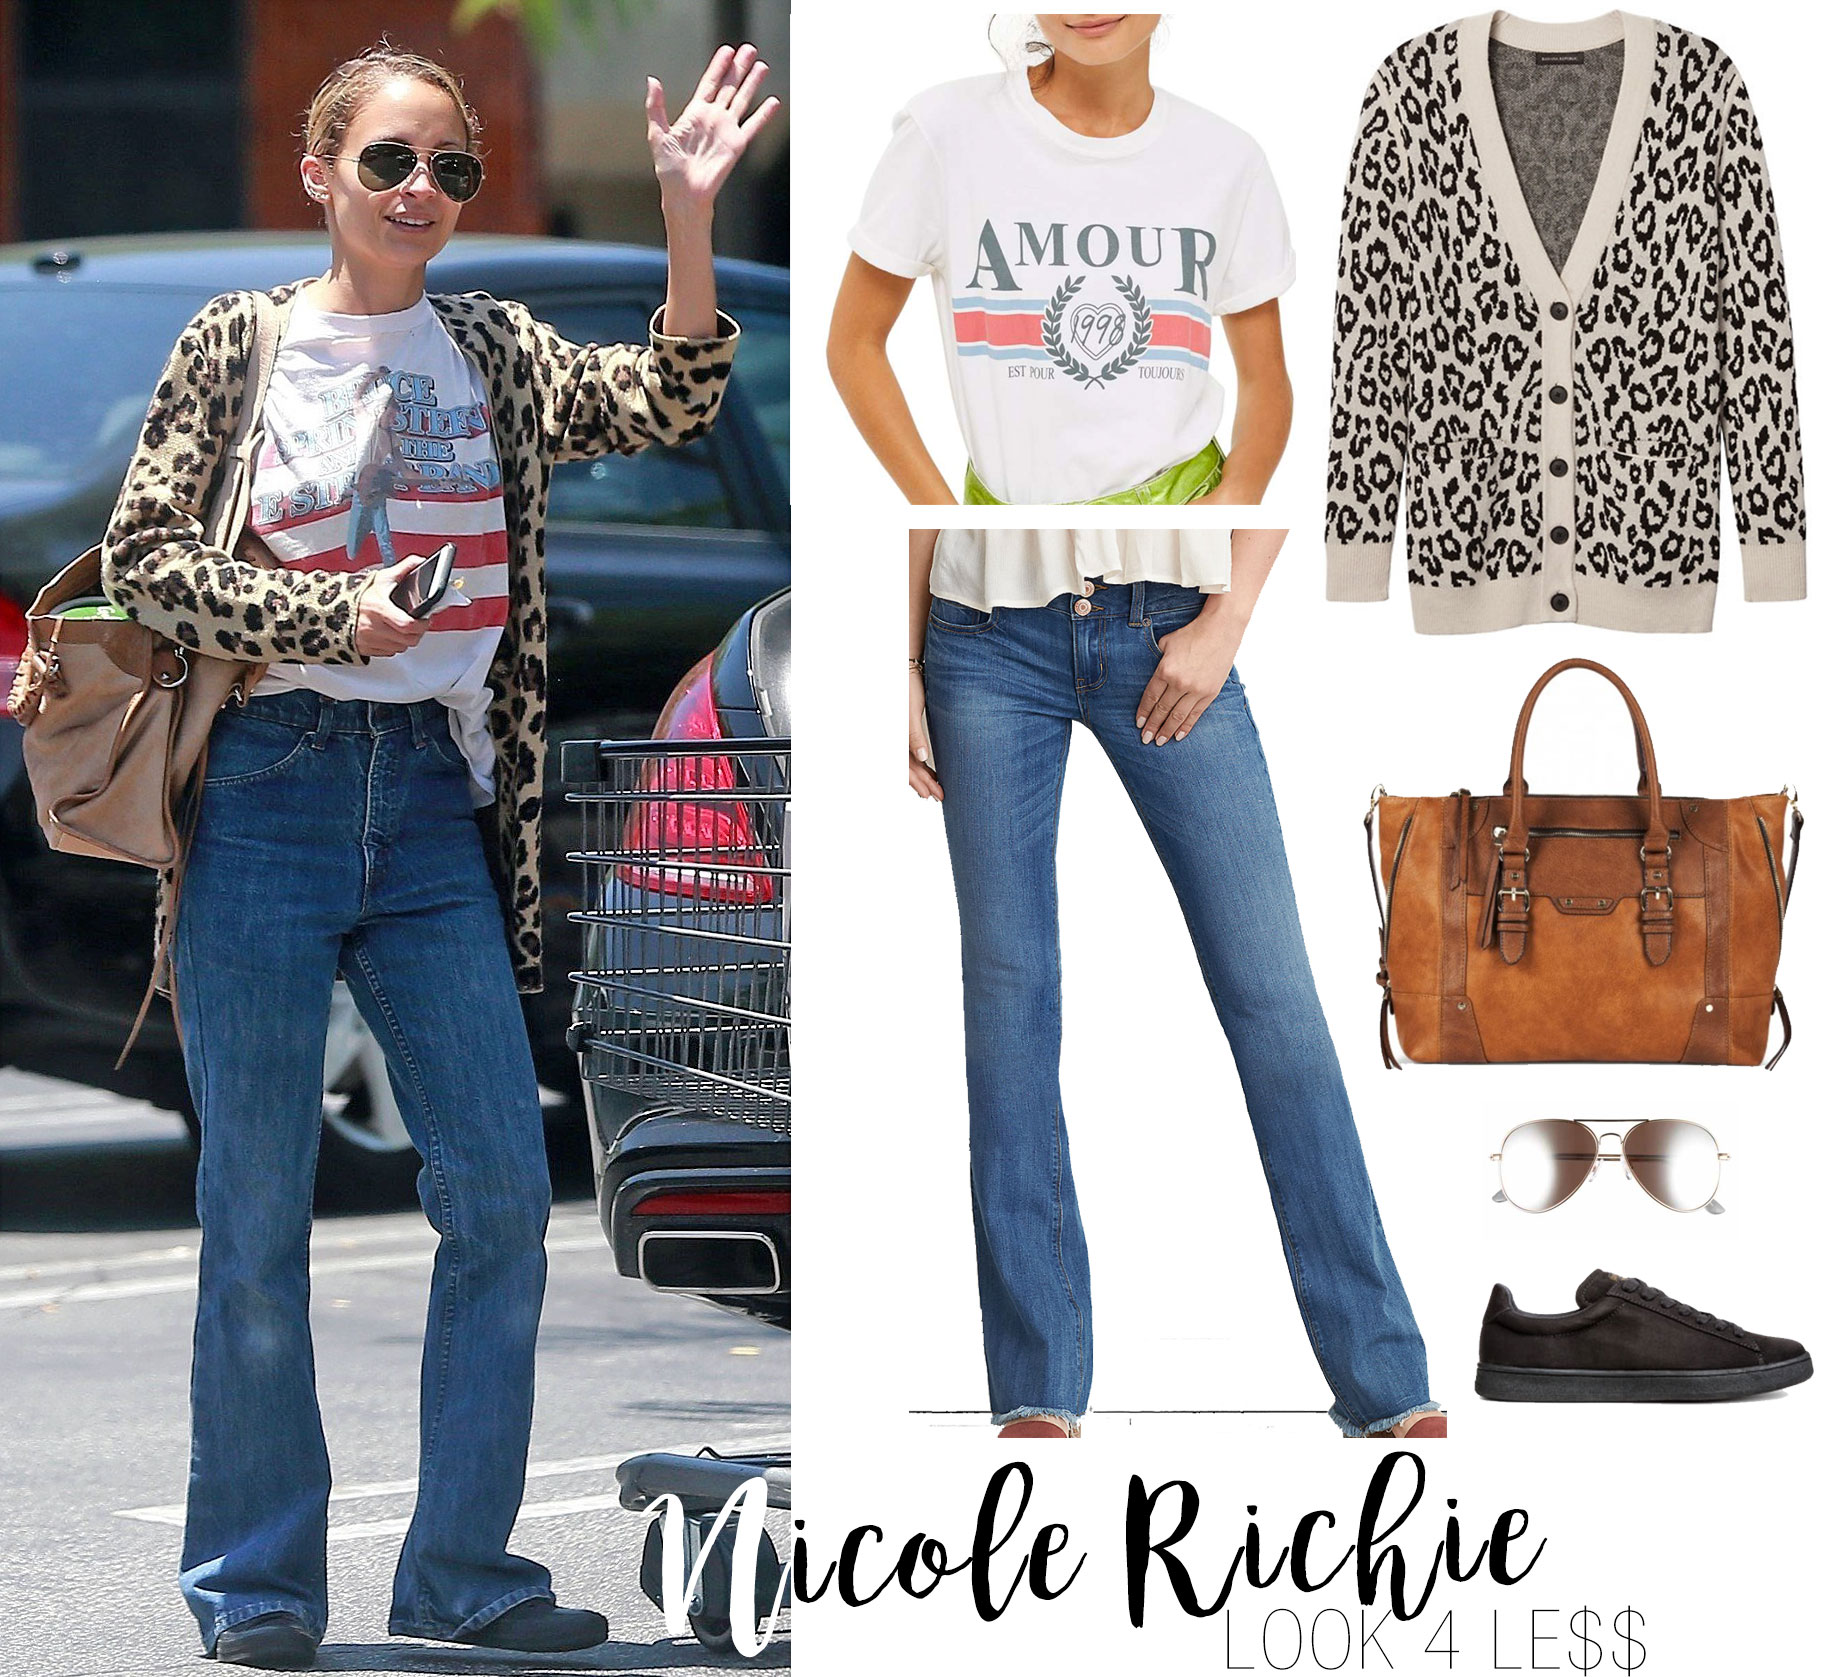 Nicole Richie wears a graphic tee, leopard cardigan and flare leg jeans while grocery shopping.